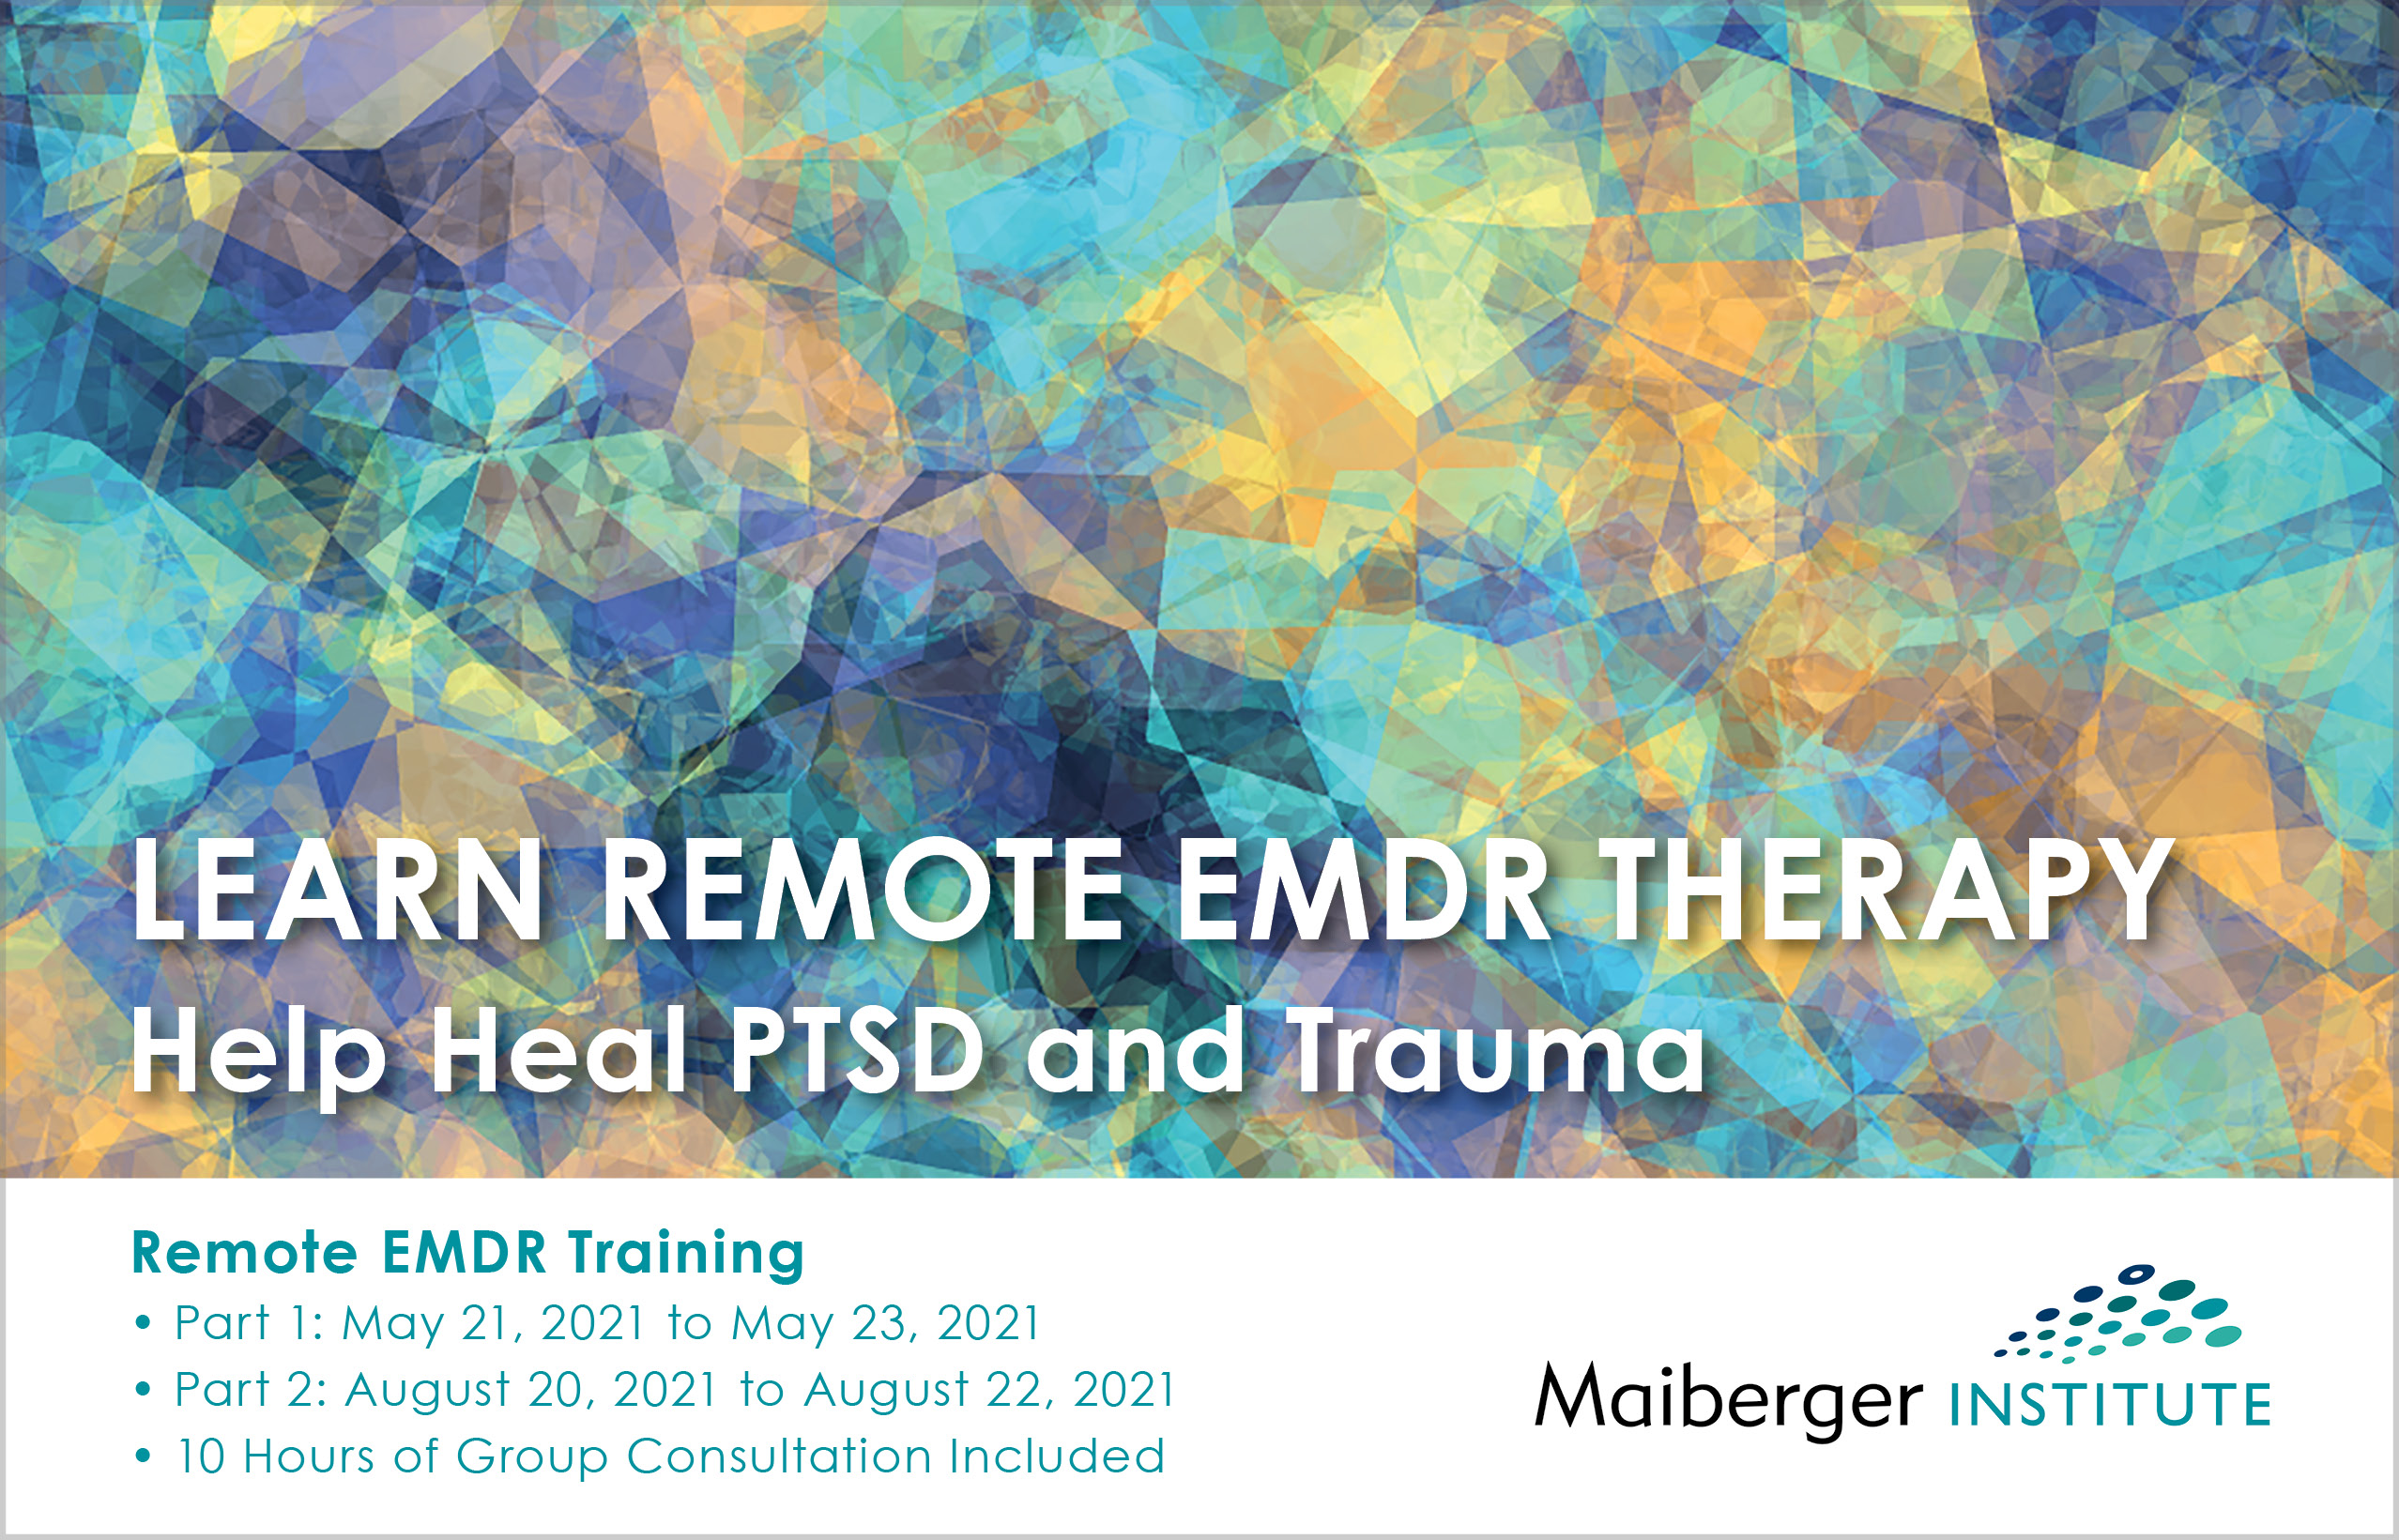 REMOTE EMDR TRAINING - MAY 21-23, 2021 and AUGUST 20-22, 2021 - Maiberger Institute - EMDR Training Schedule